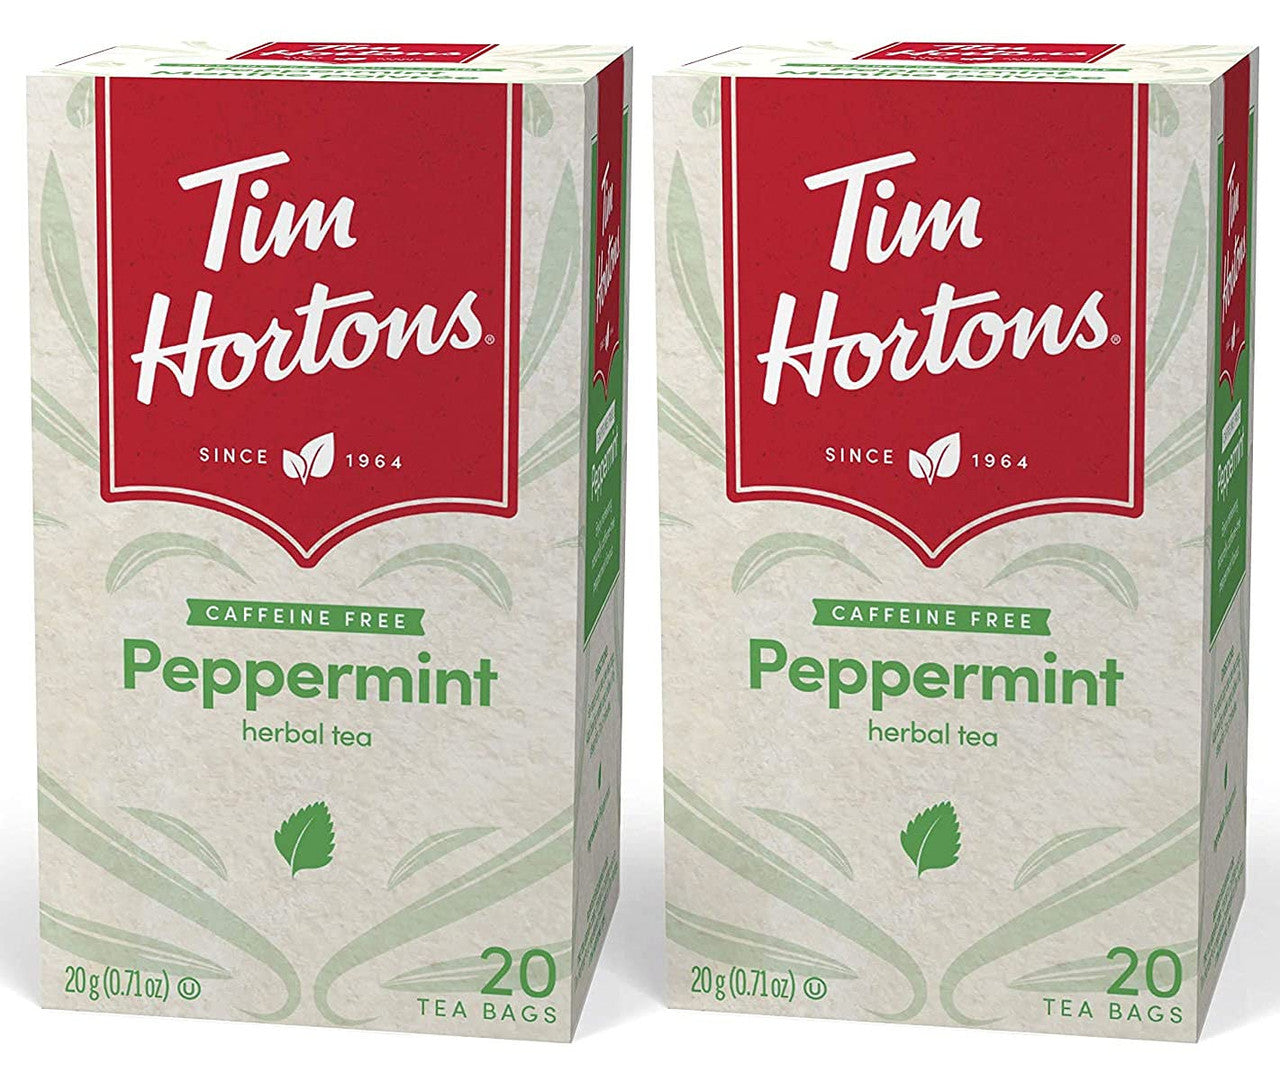 Tim Hortons Peppermint Tea Bags, 20 count, 40g/1.4oz, 2-Pack, {Imported from Canada}